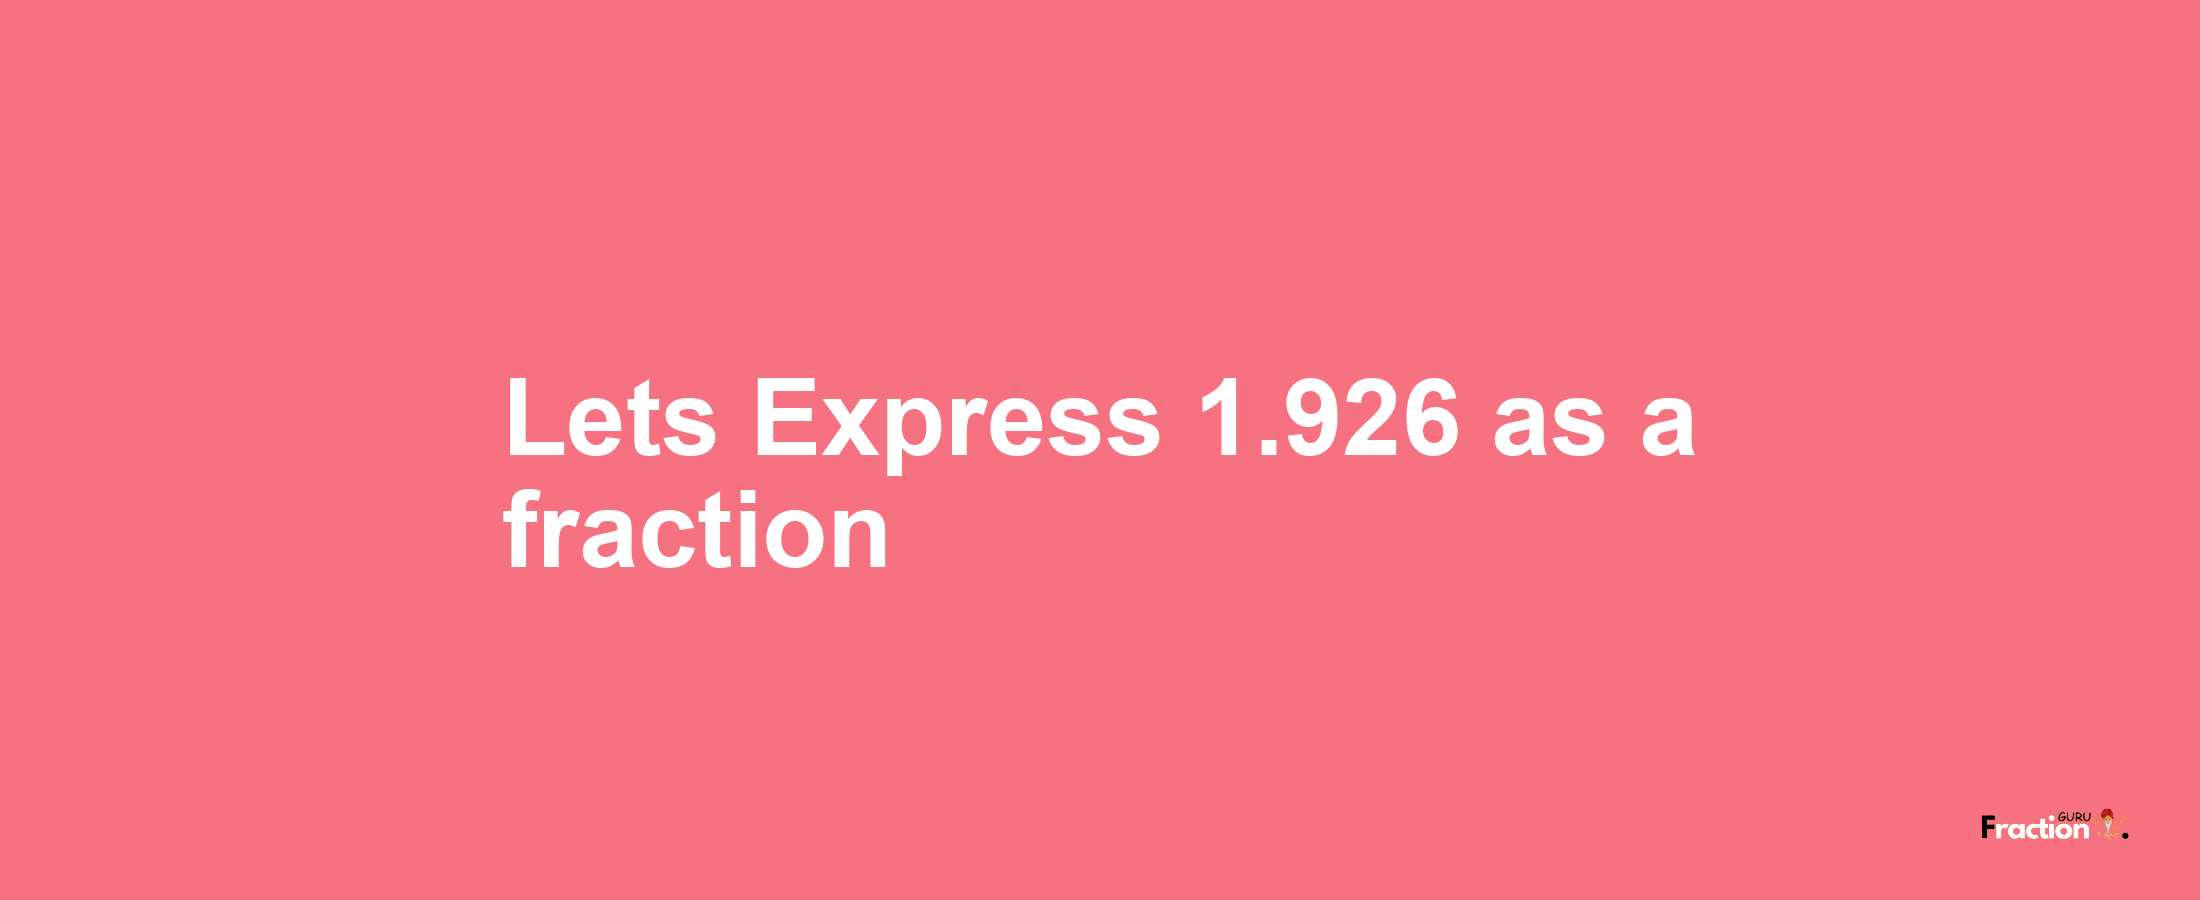 Lets Express 1.926 as afraction